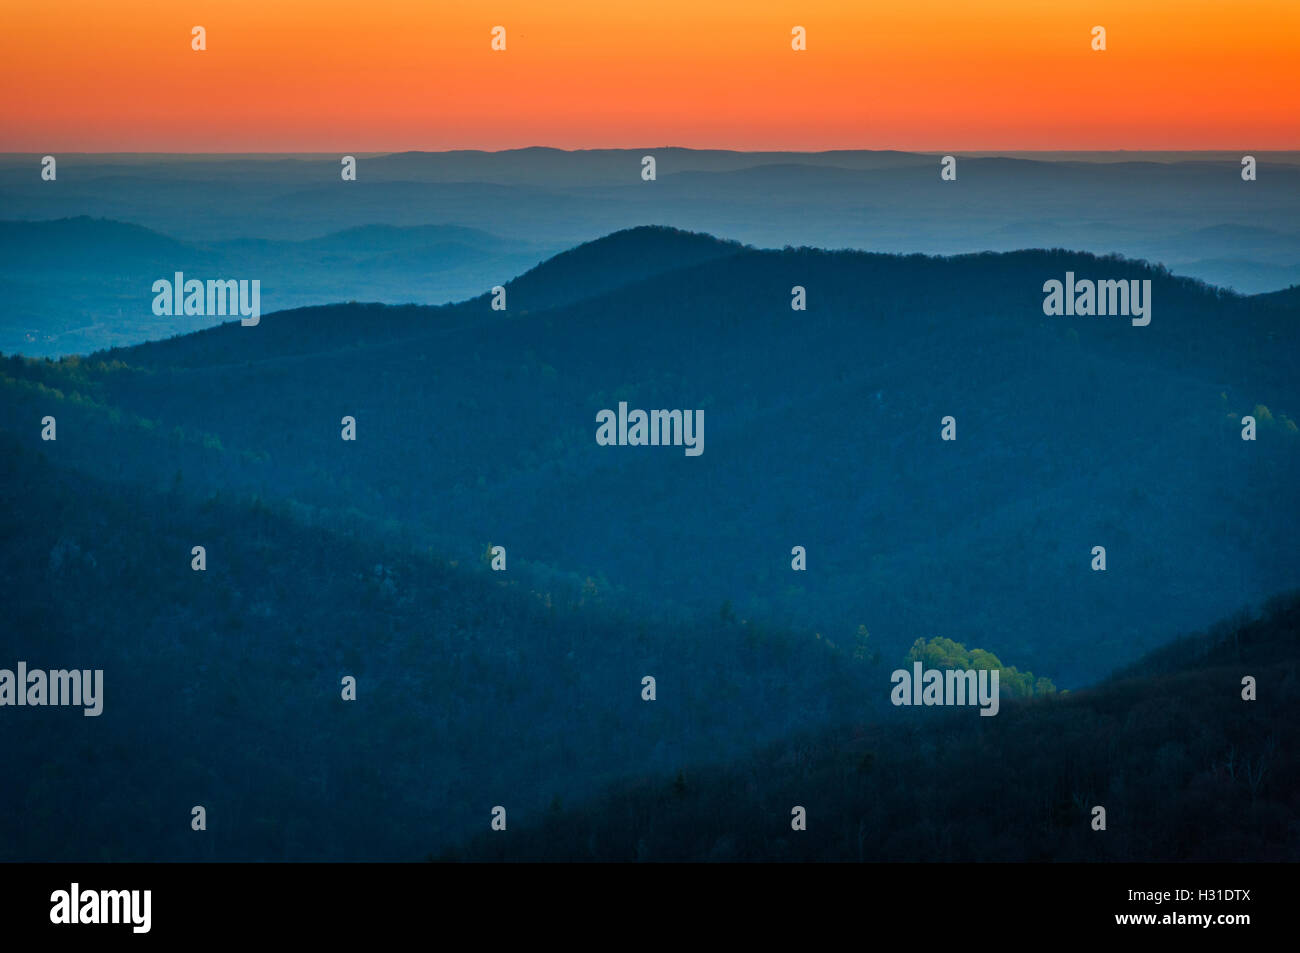 Sunrise over the Appalachian Mountains, seen from Skyline Drive in Shenandoah National Park, Virginia. Stock Photo